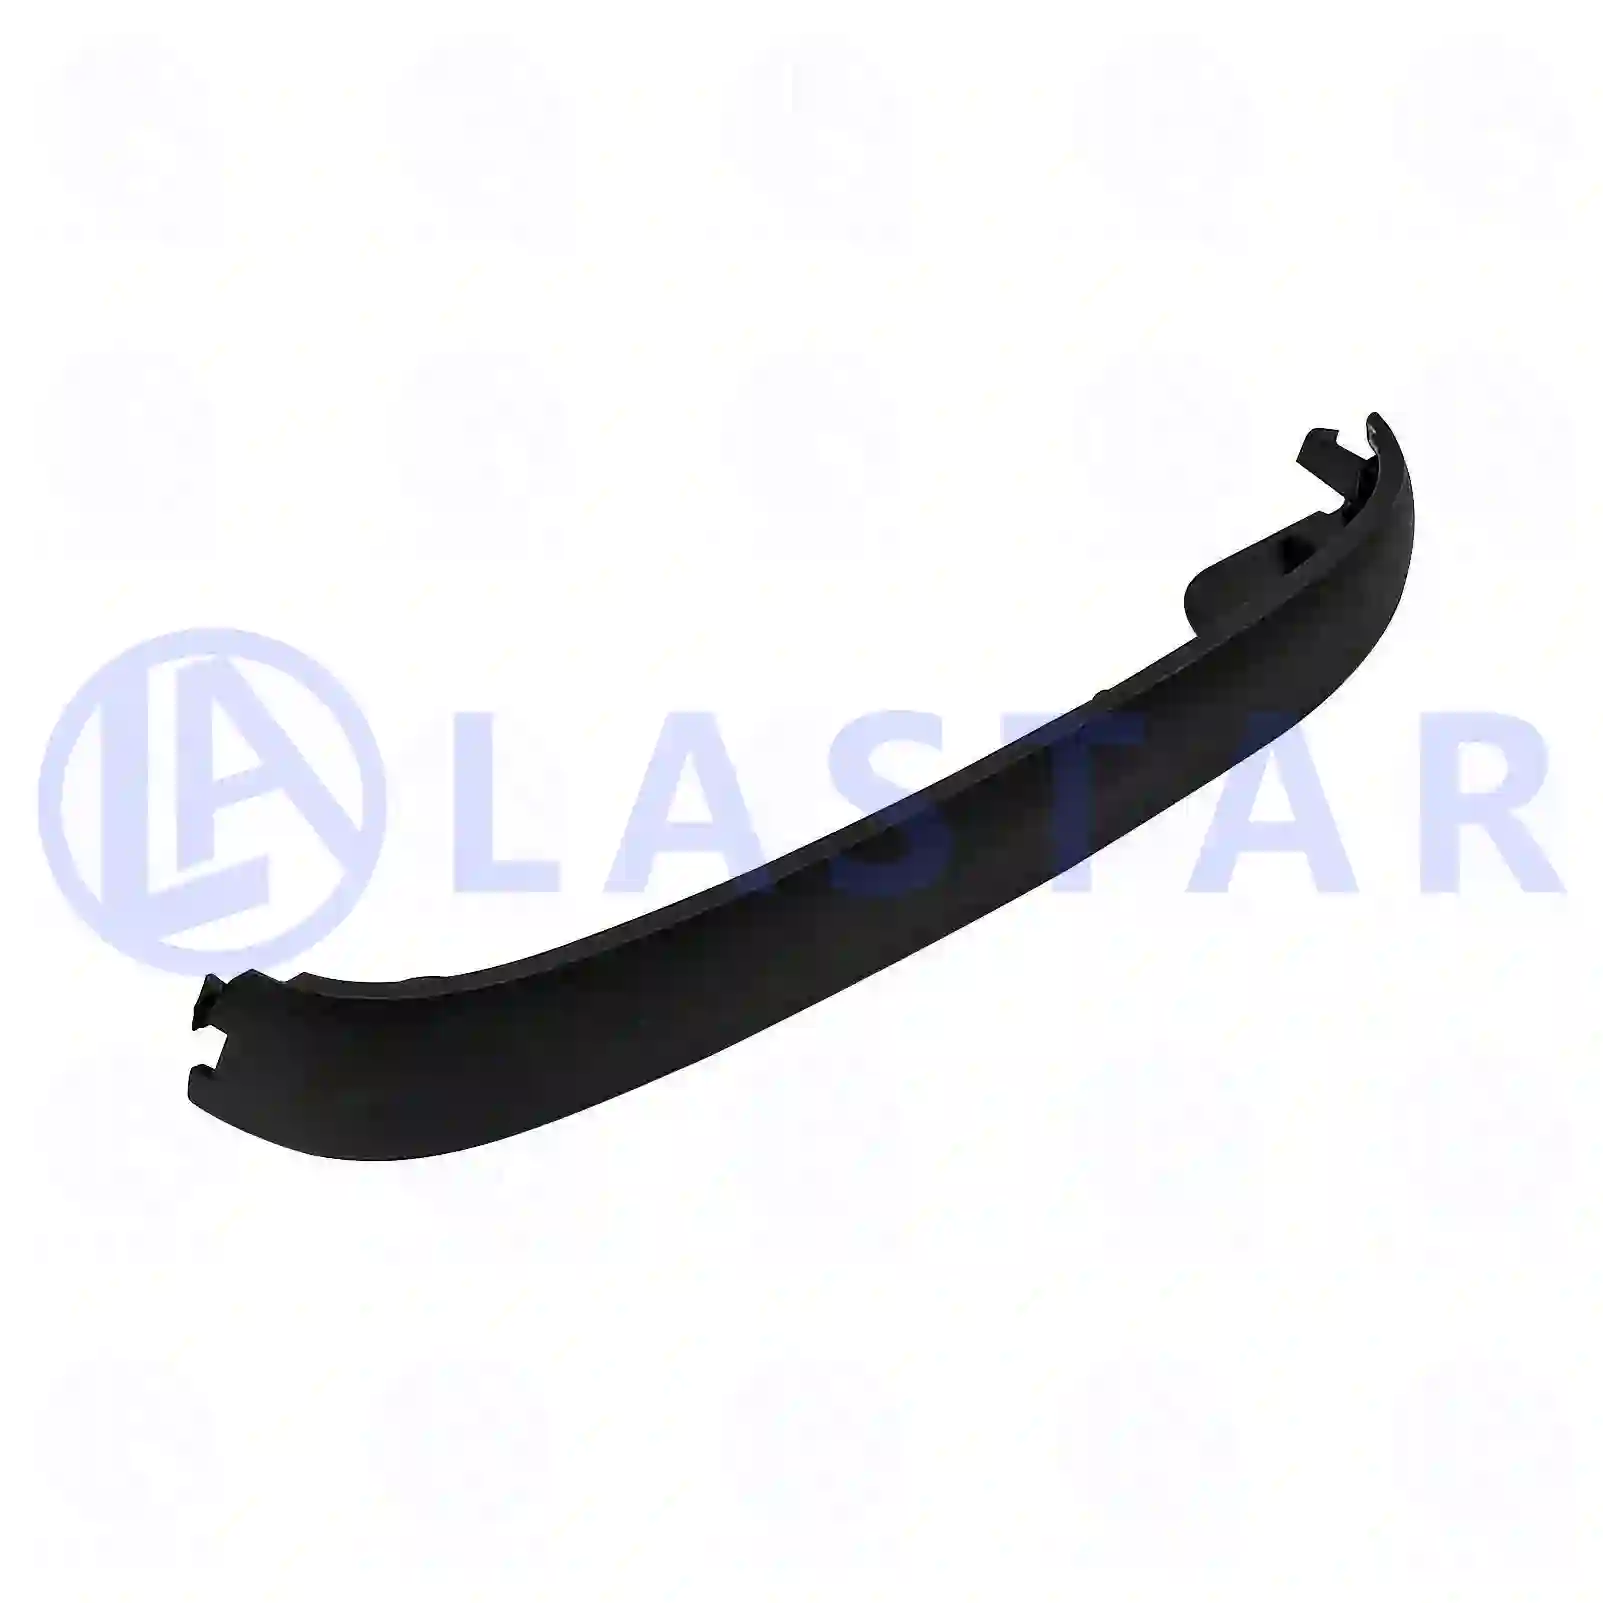 Cover, handle, cabin, 77718003, 3175366, ZG60458-0008 ||  77718003 Lastar Spare Part | Truck Spare Parts, Auotomotive Spare Parts Cover, handle, cabin, 77718003, 3175366, ZG60458-0008 ||  77718003 Lastar Spare Part | Truck Spare Parts, Auotomotive Spare Parts